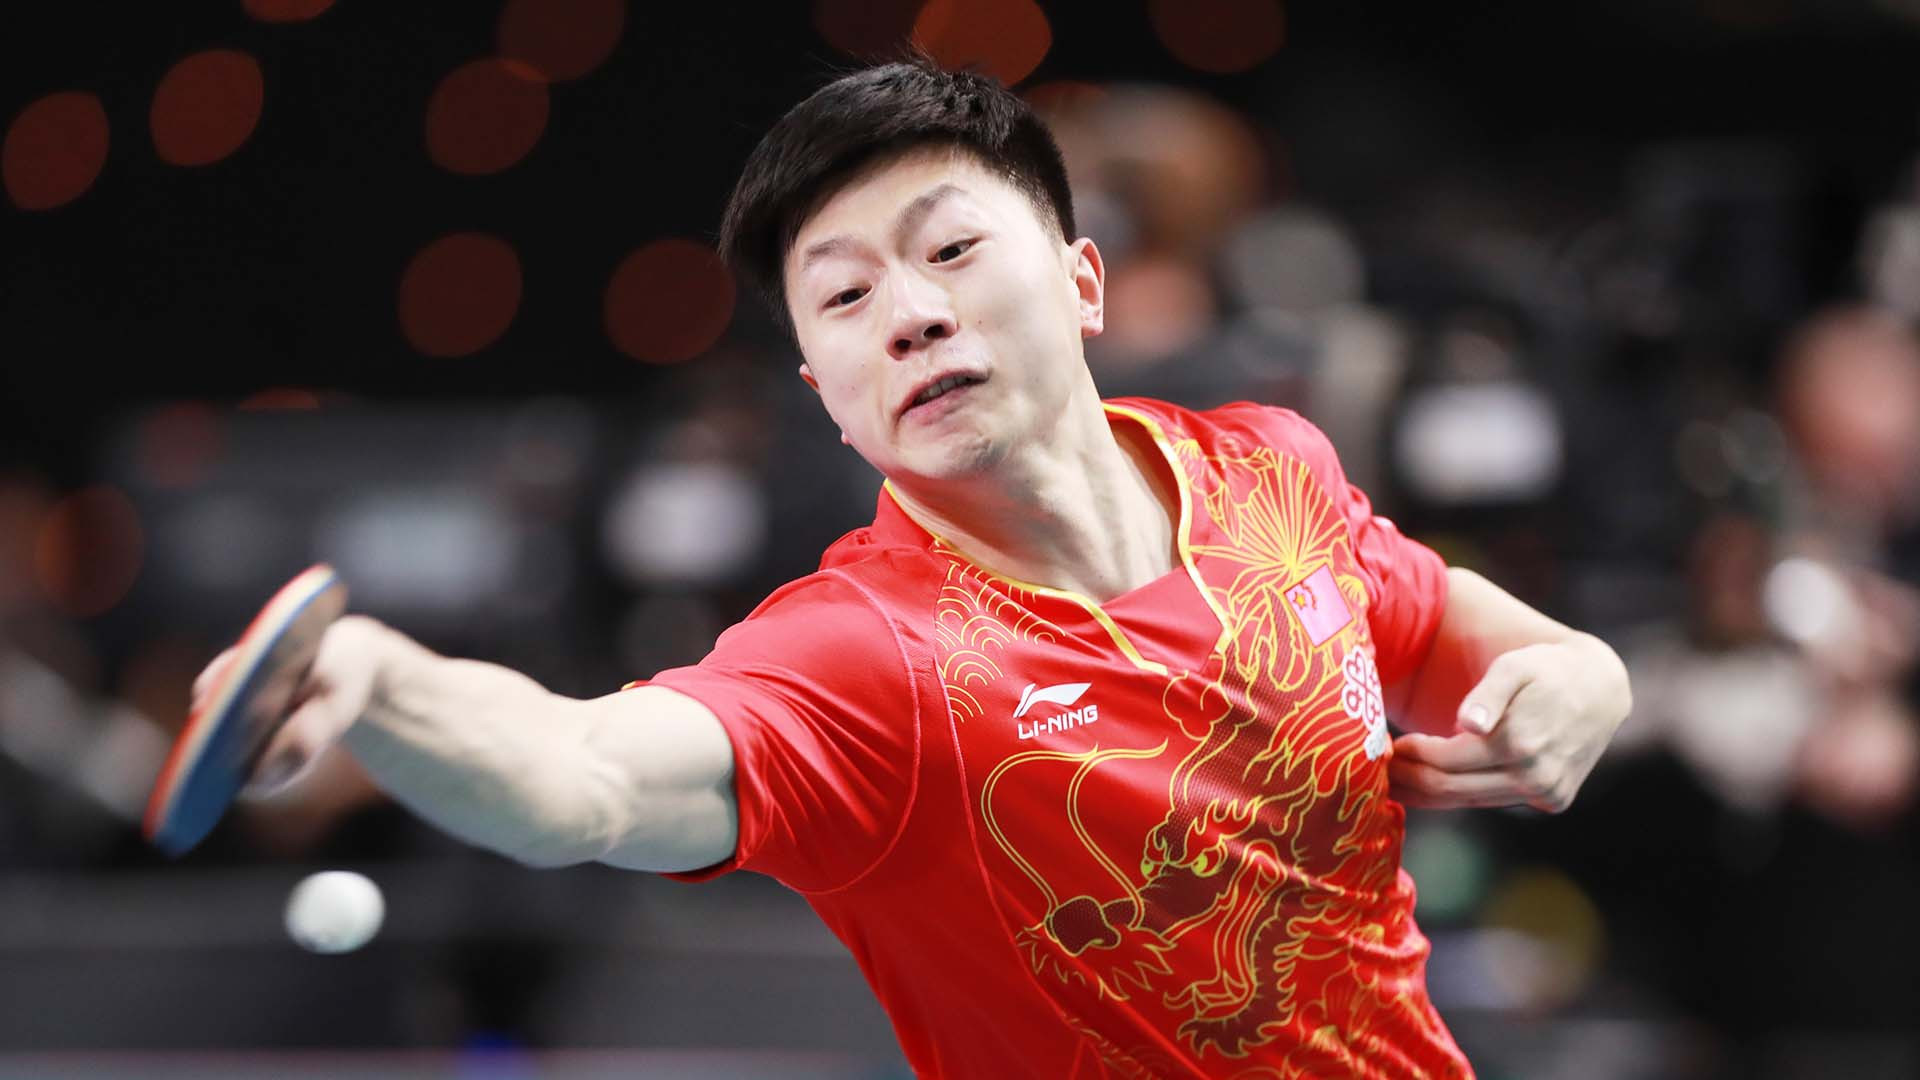  Business as usual as China’s men and women win ITTF Team World Cup in London